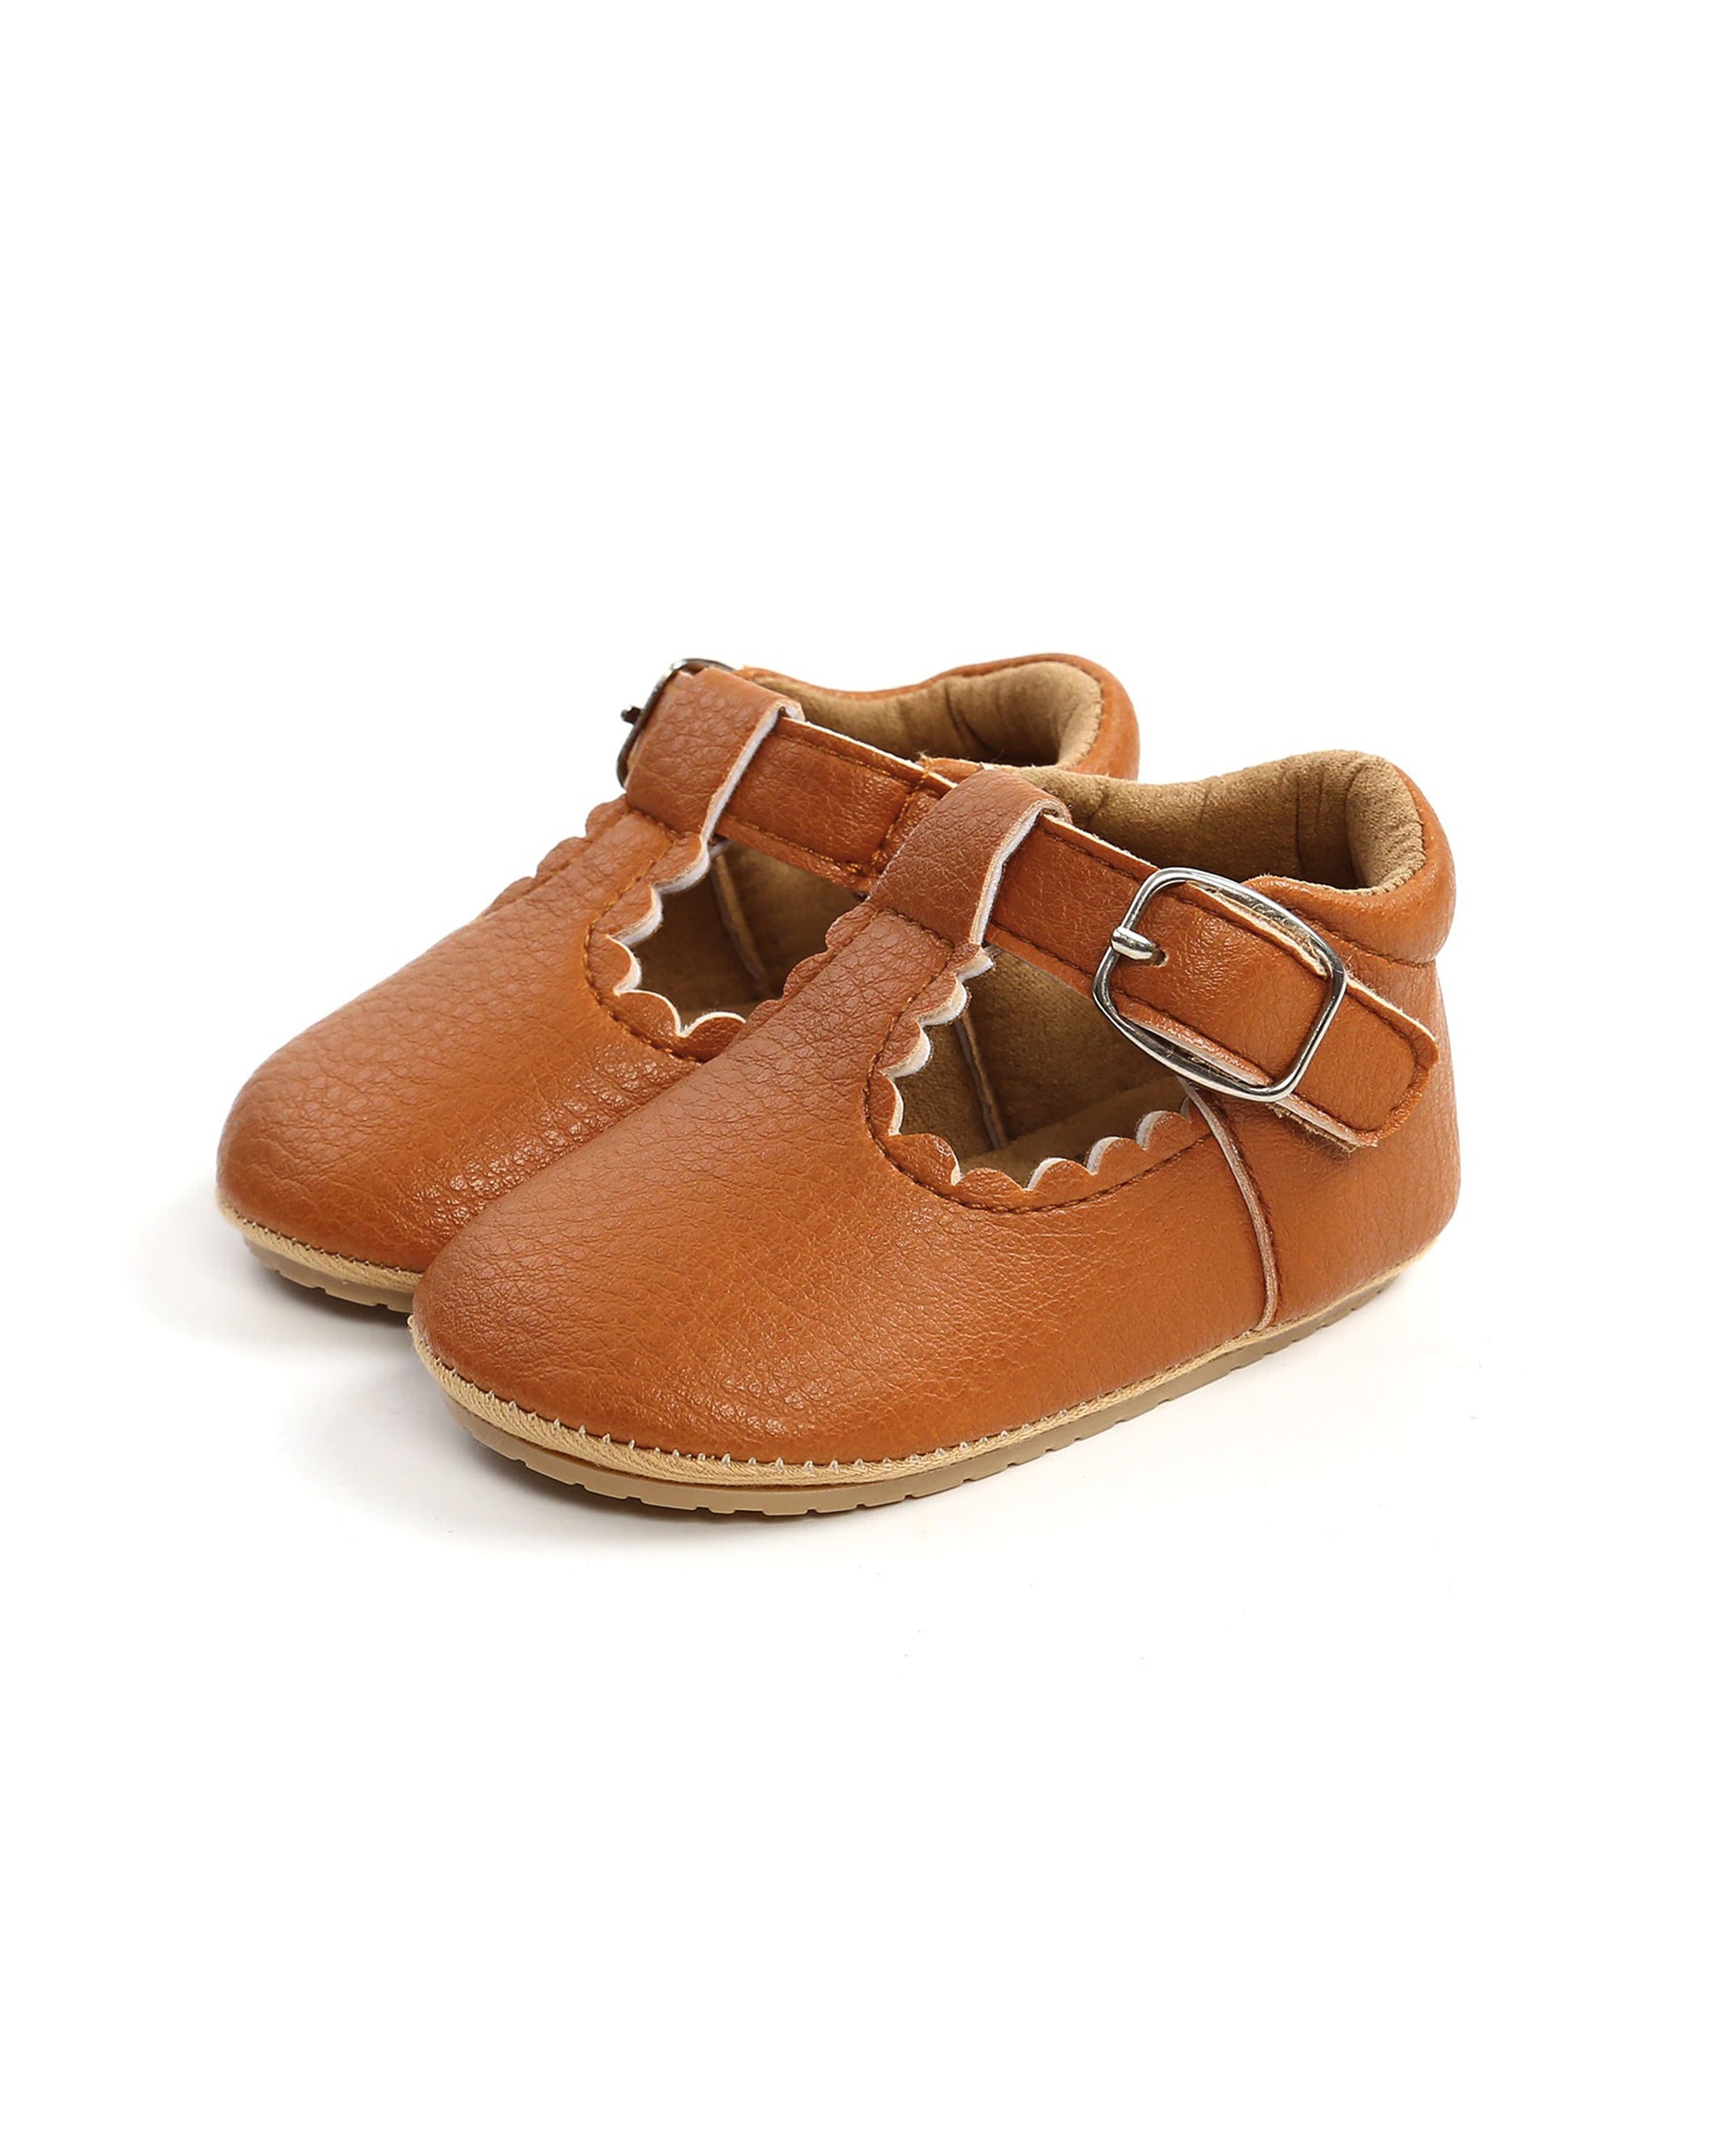  brown t-bar leather baby shoes